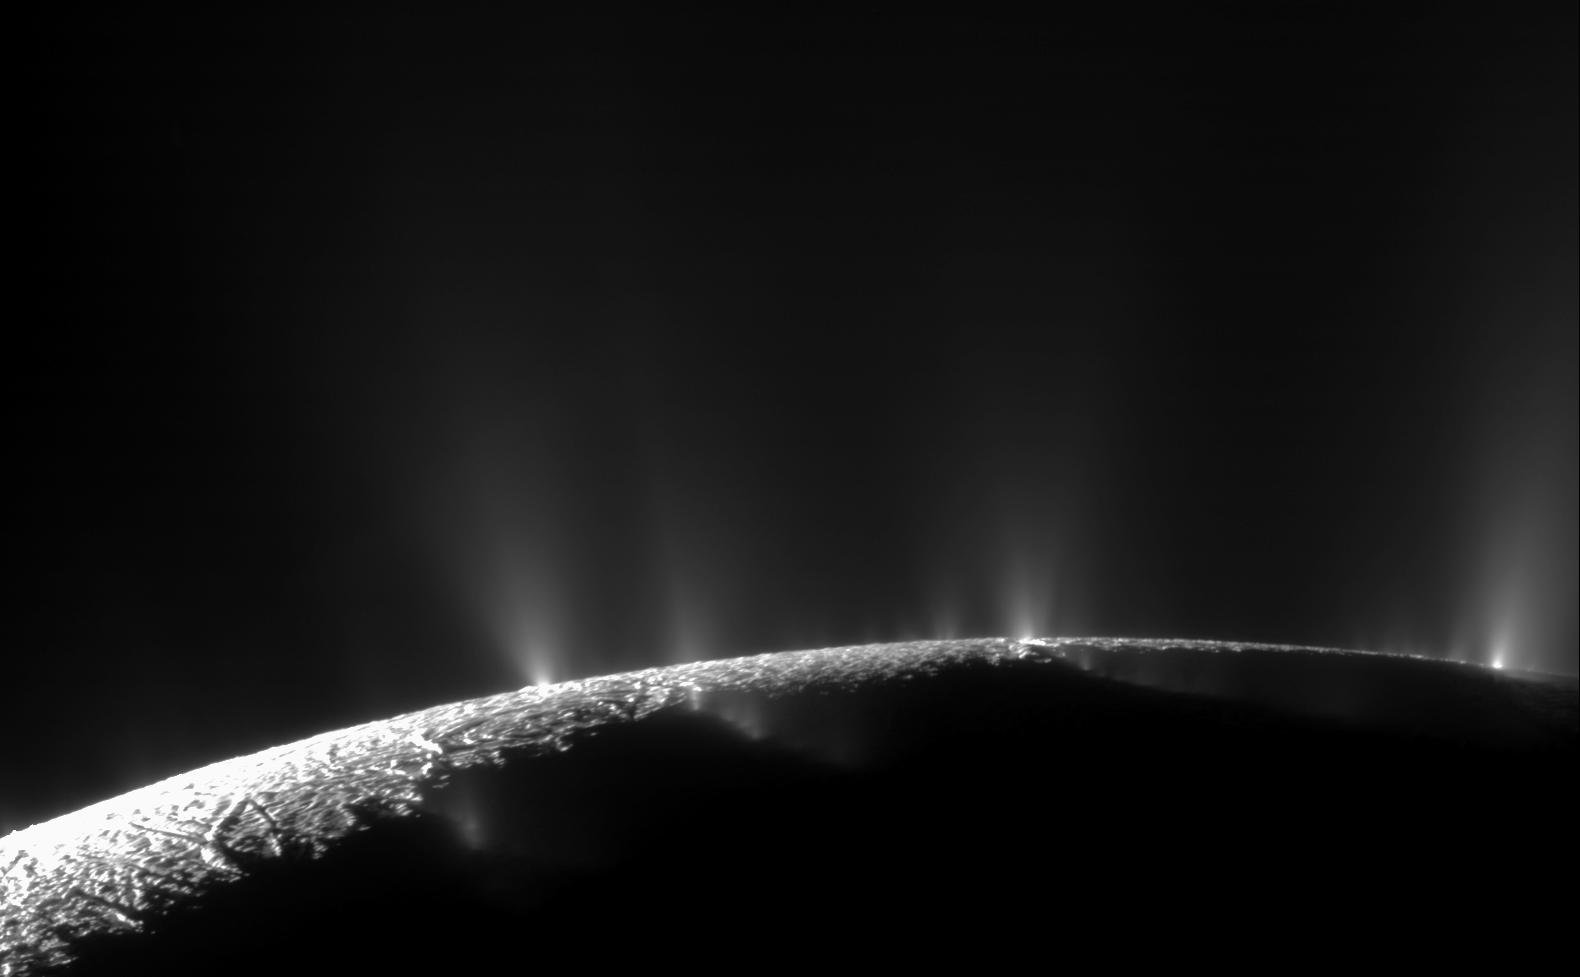 A mosaic was created from two high-resolution images that were captured by the narrow-angle camera when NASA's Cassini spacecraft flew past Enceladus